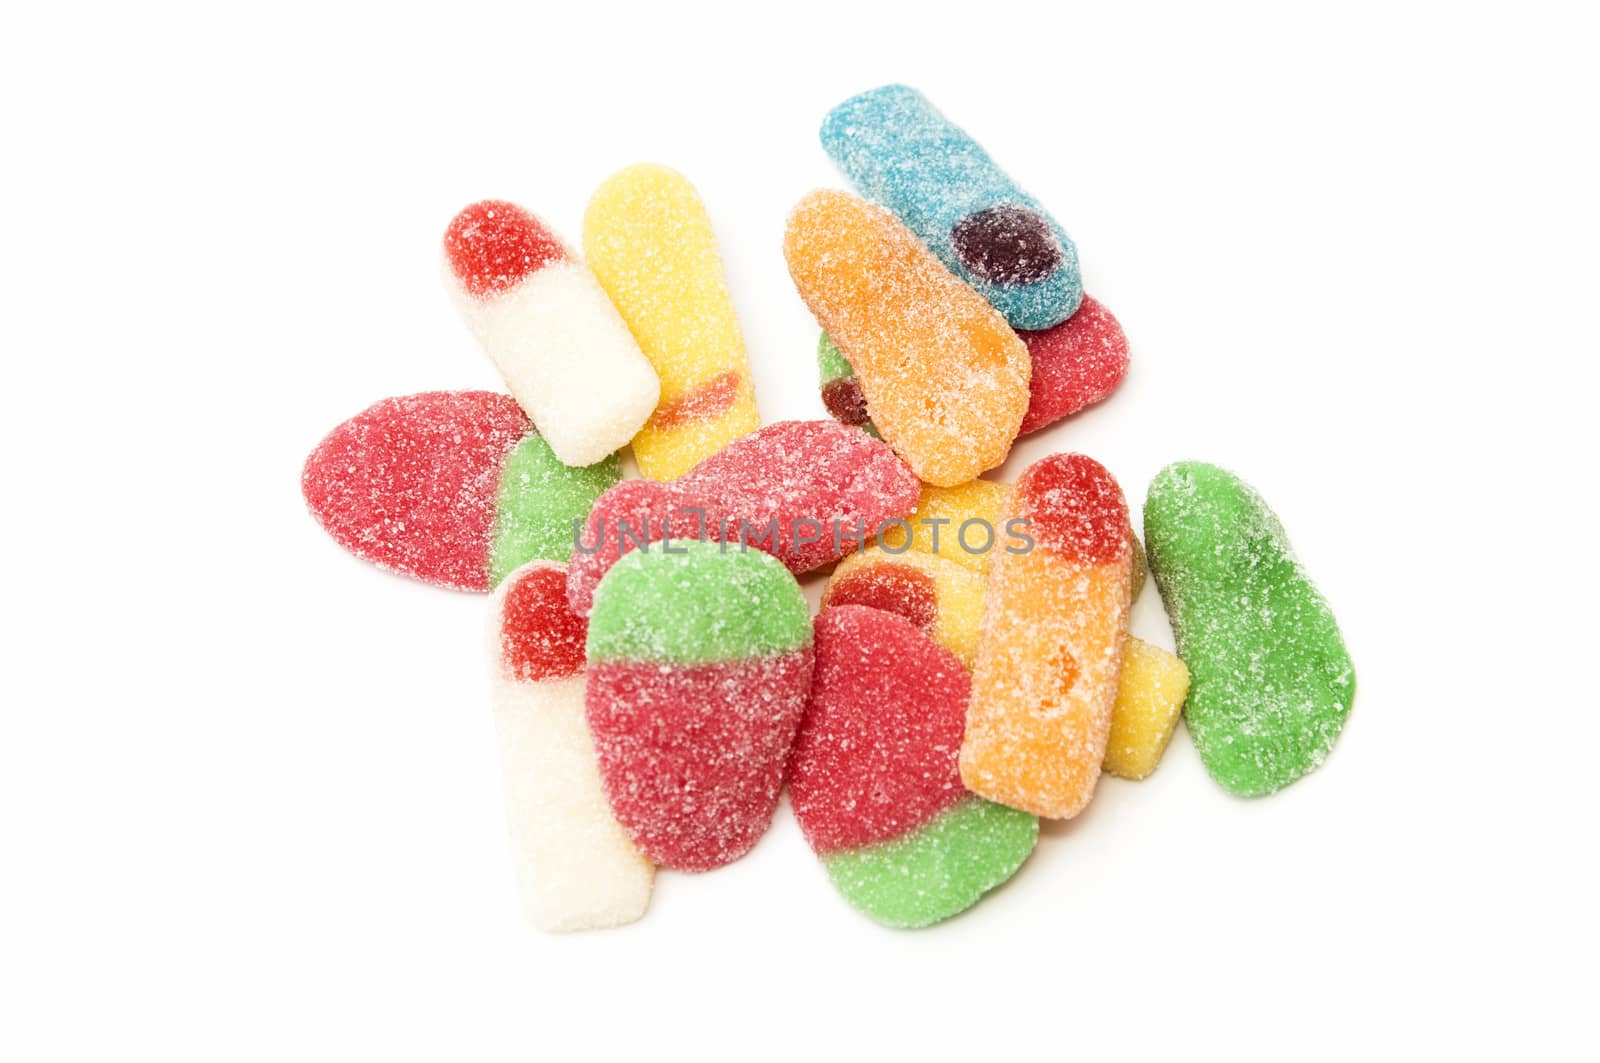 jelly beans on a white background